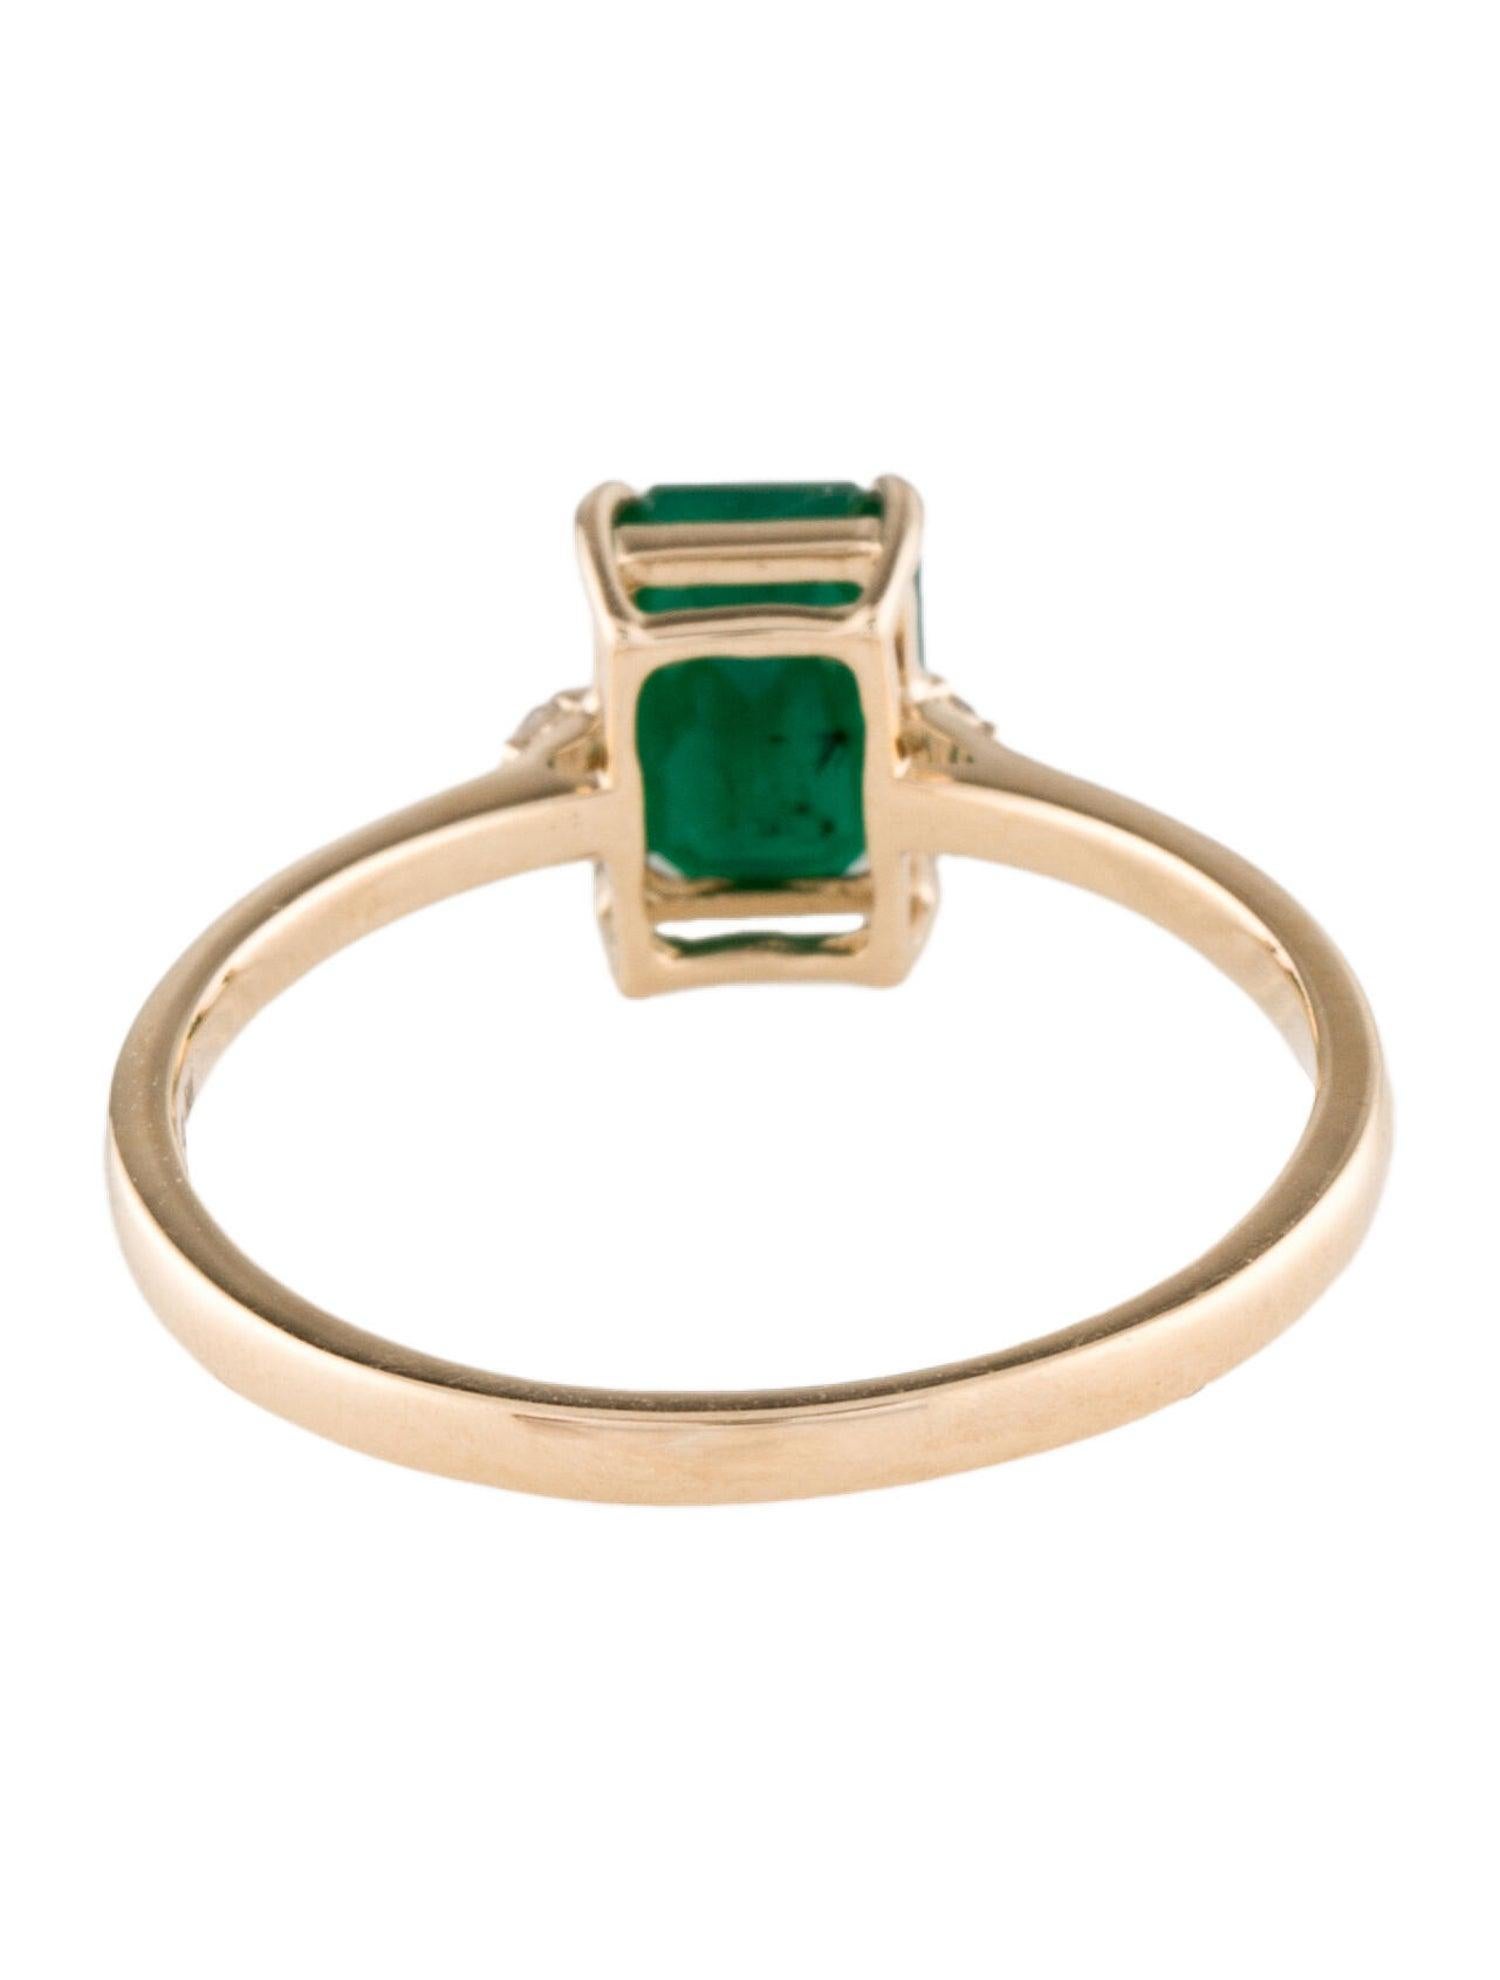 Women's 14K Yellow Gold Emerald Cut Emerald & Diamond Cocktail Ring Size 7 For Sale